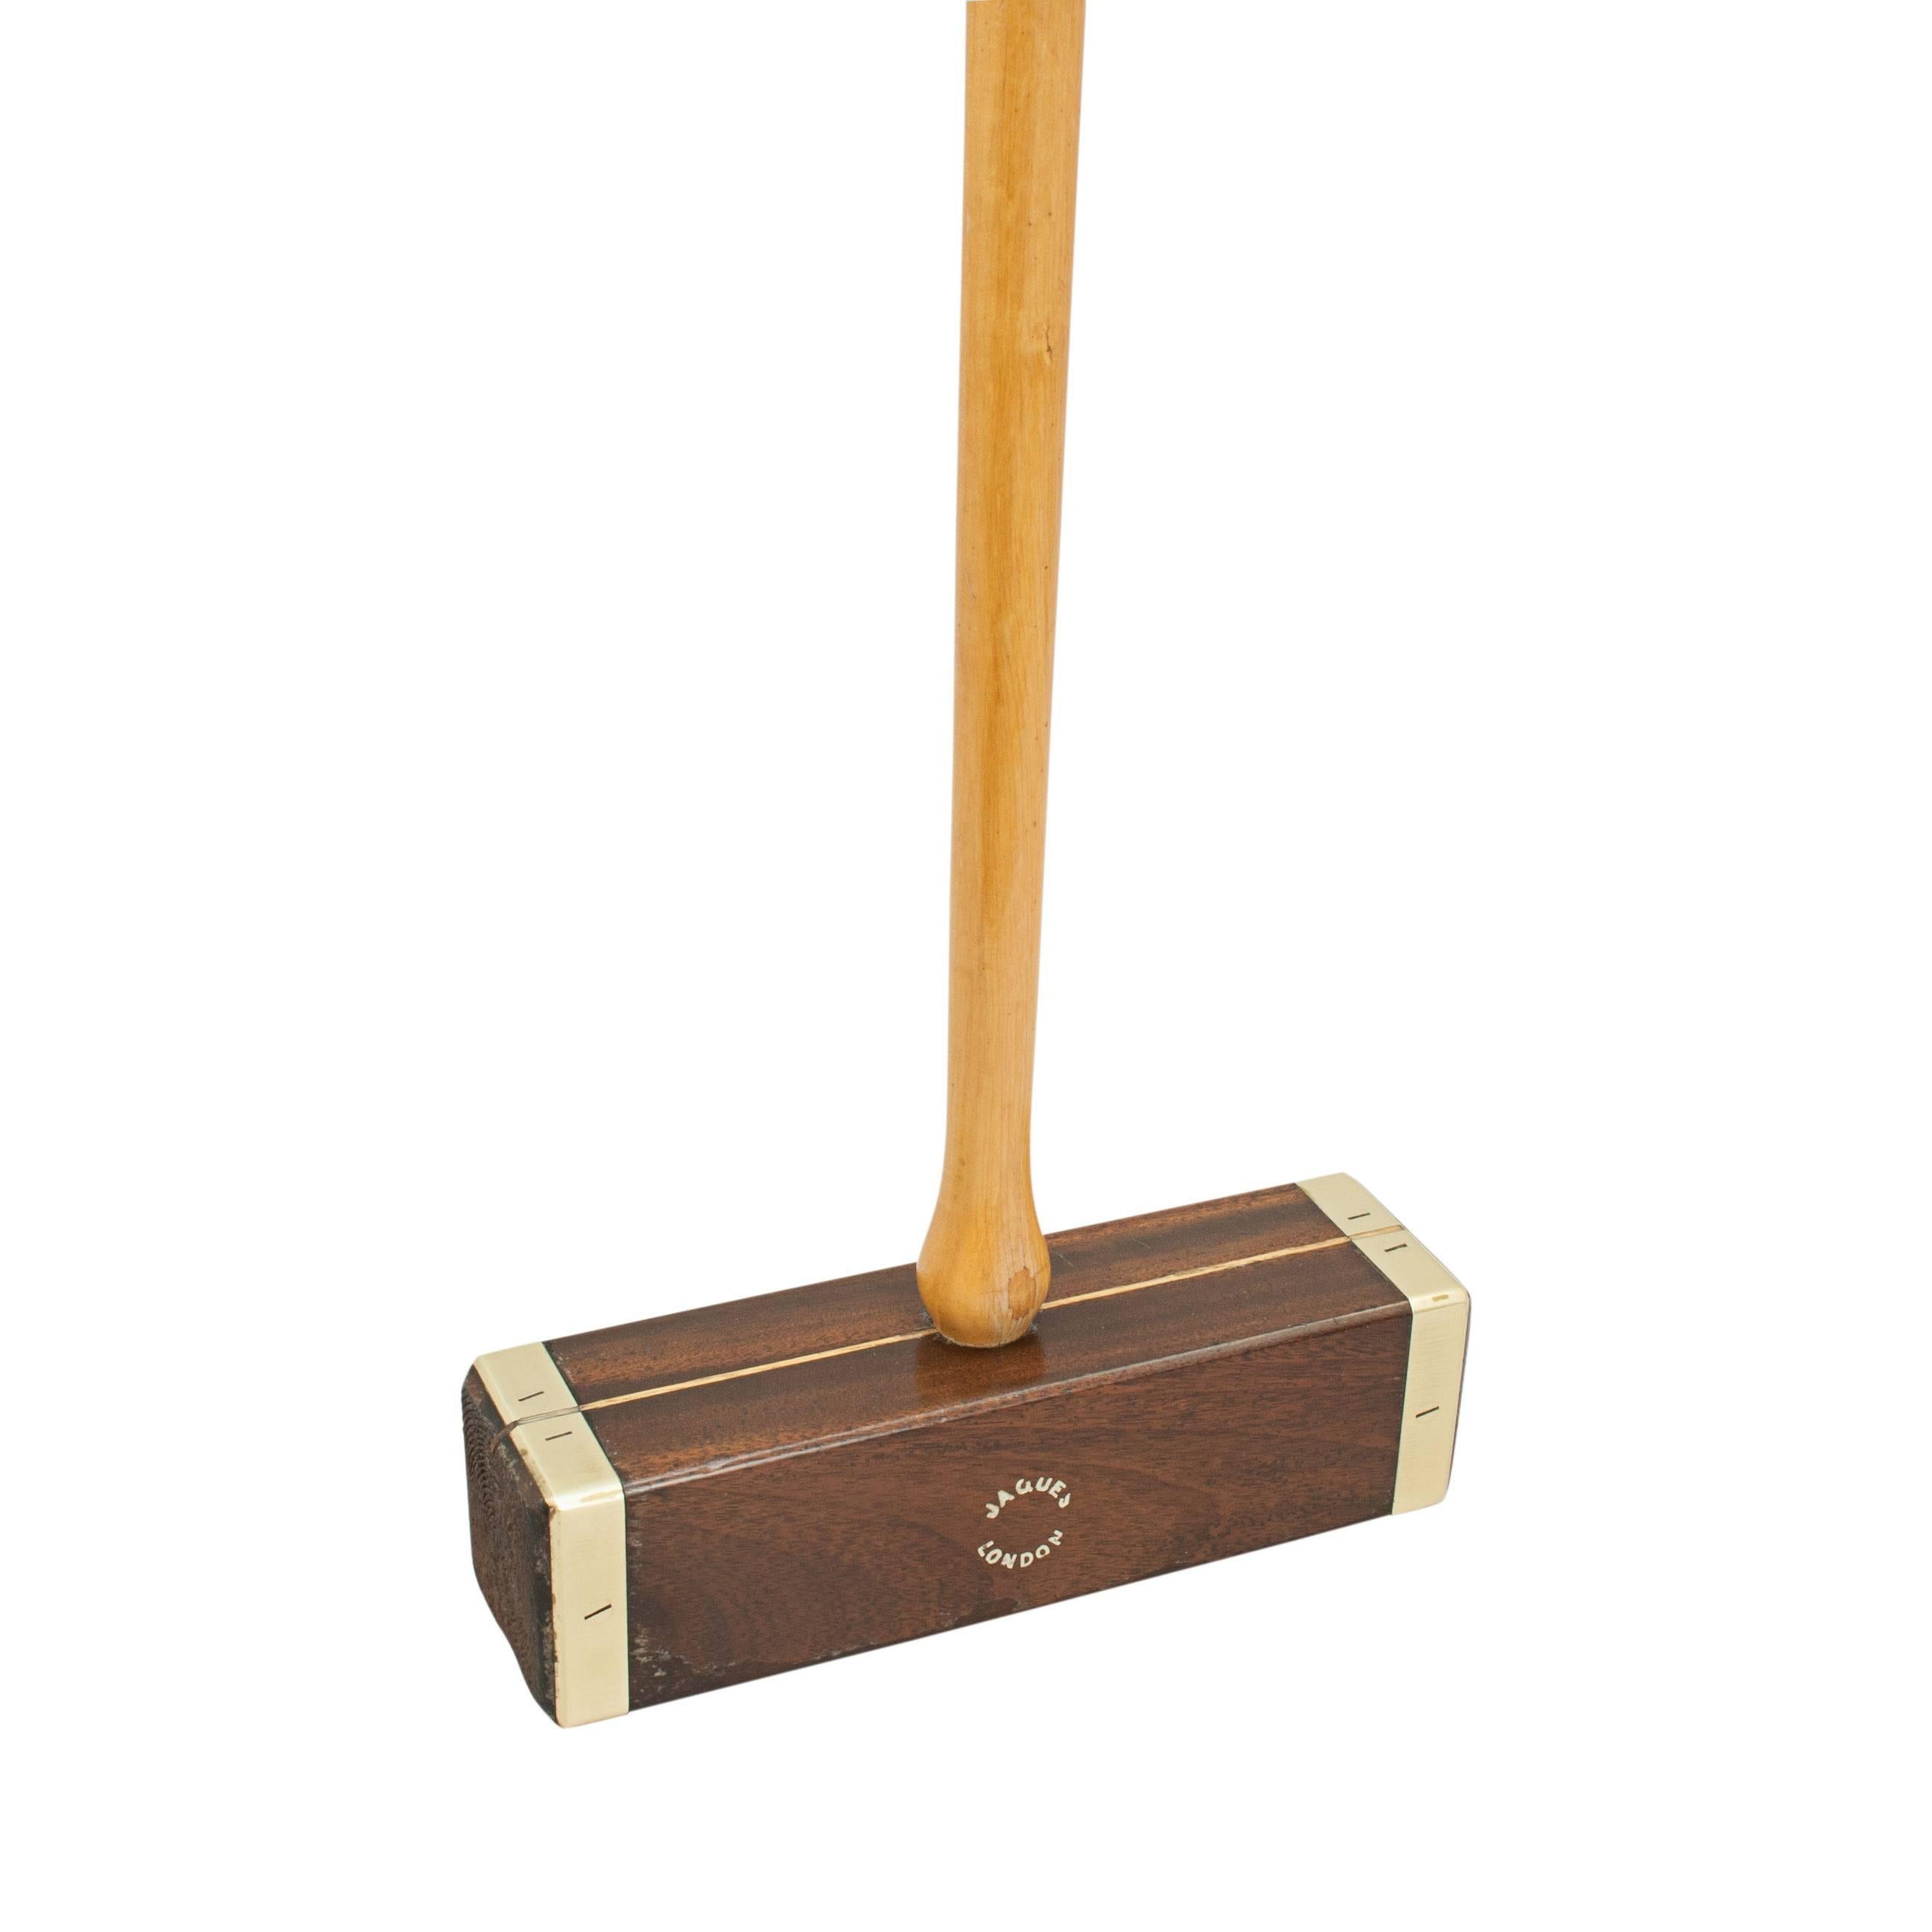 Vintage brass bound Jaques Croquet mallet. 
A singular brass bound, square head, croquet mallet made by John Jaques. The mallet head is made from hardwood with circular face markings, an inlaid alignment guide and an octagonal hickory handle. The